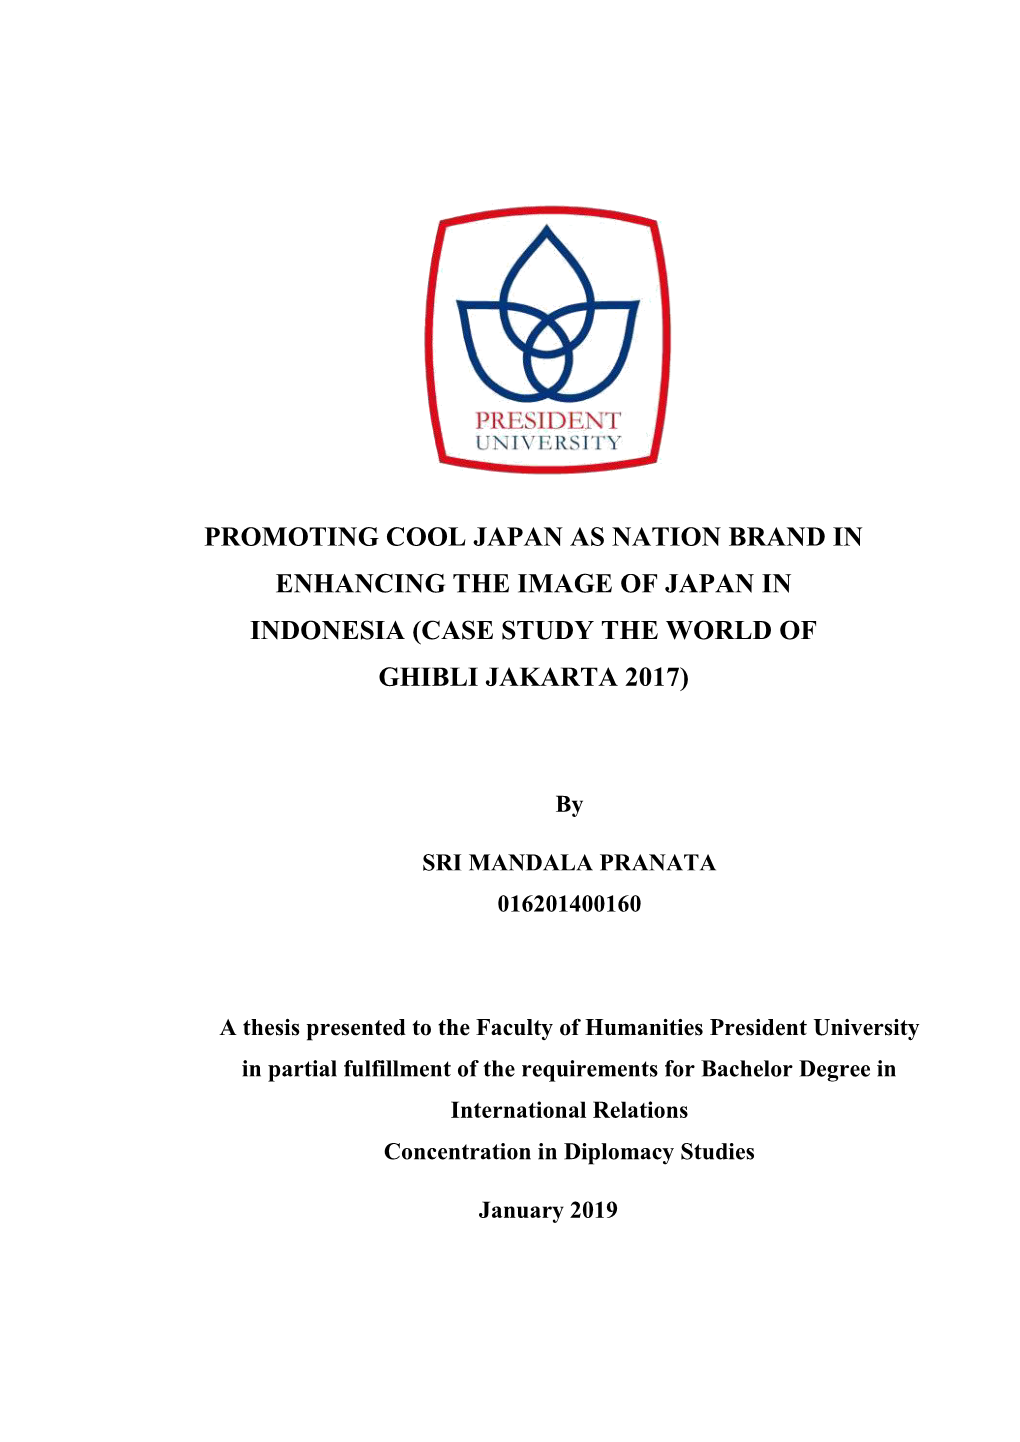 Promoting Cool Japan As Nation Brand in Enhancing the Image of Japan in Indonesia (Case Study the World Of